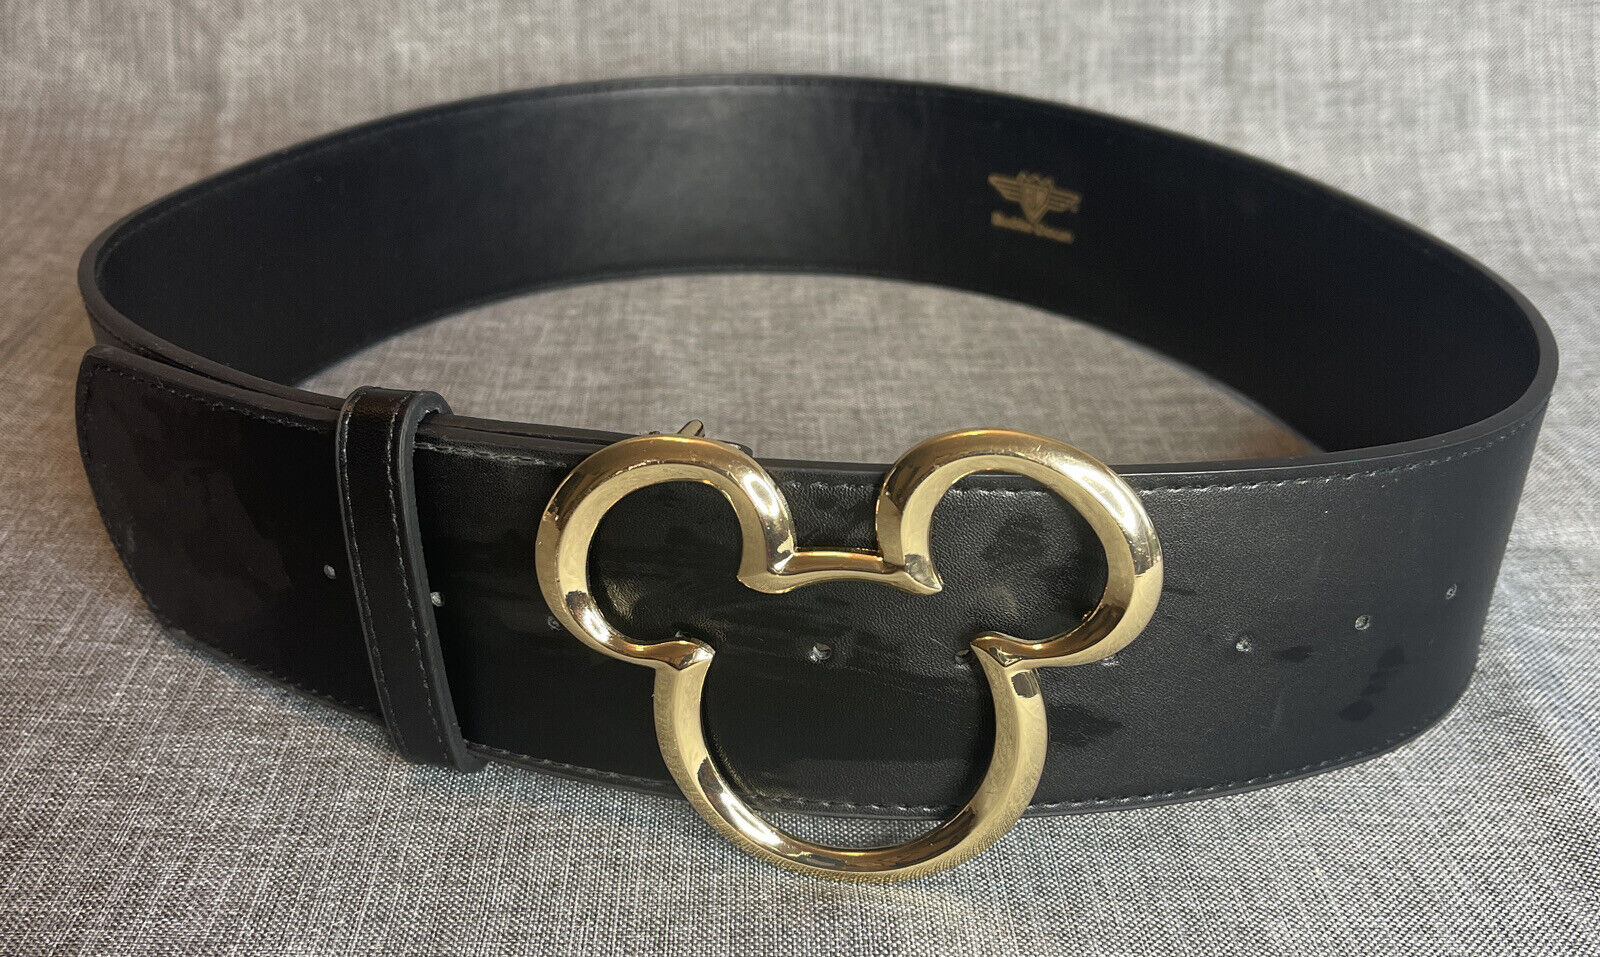 Buckle-Down Disney Wide Belt Black Gold Mickey Mouse Buckle Adjustable Size M